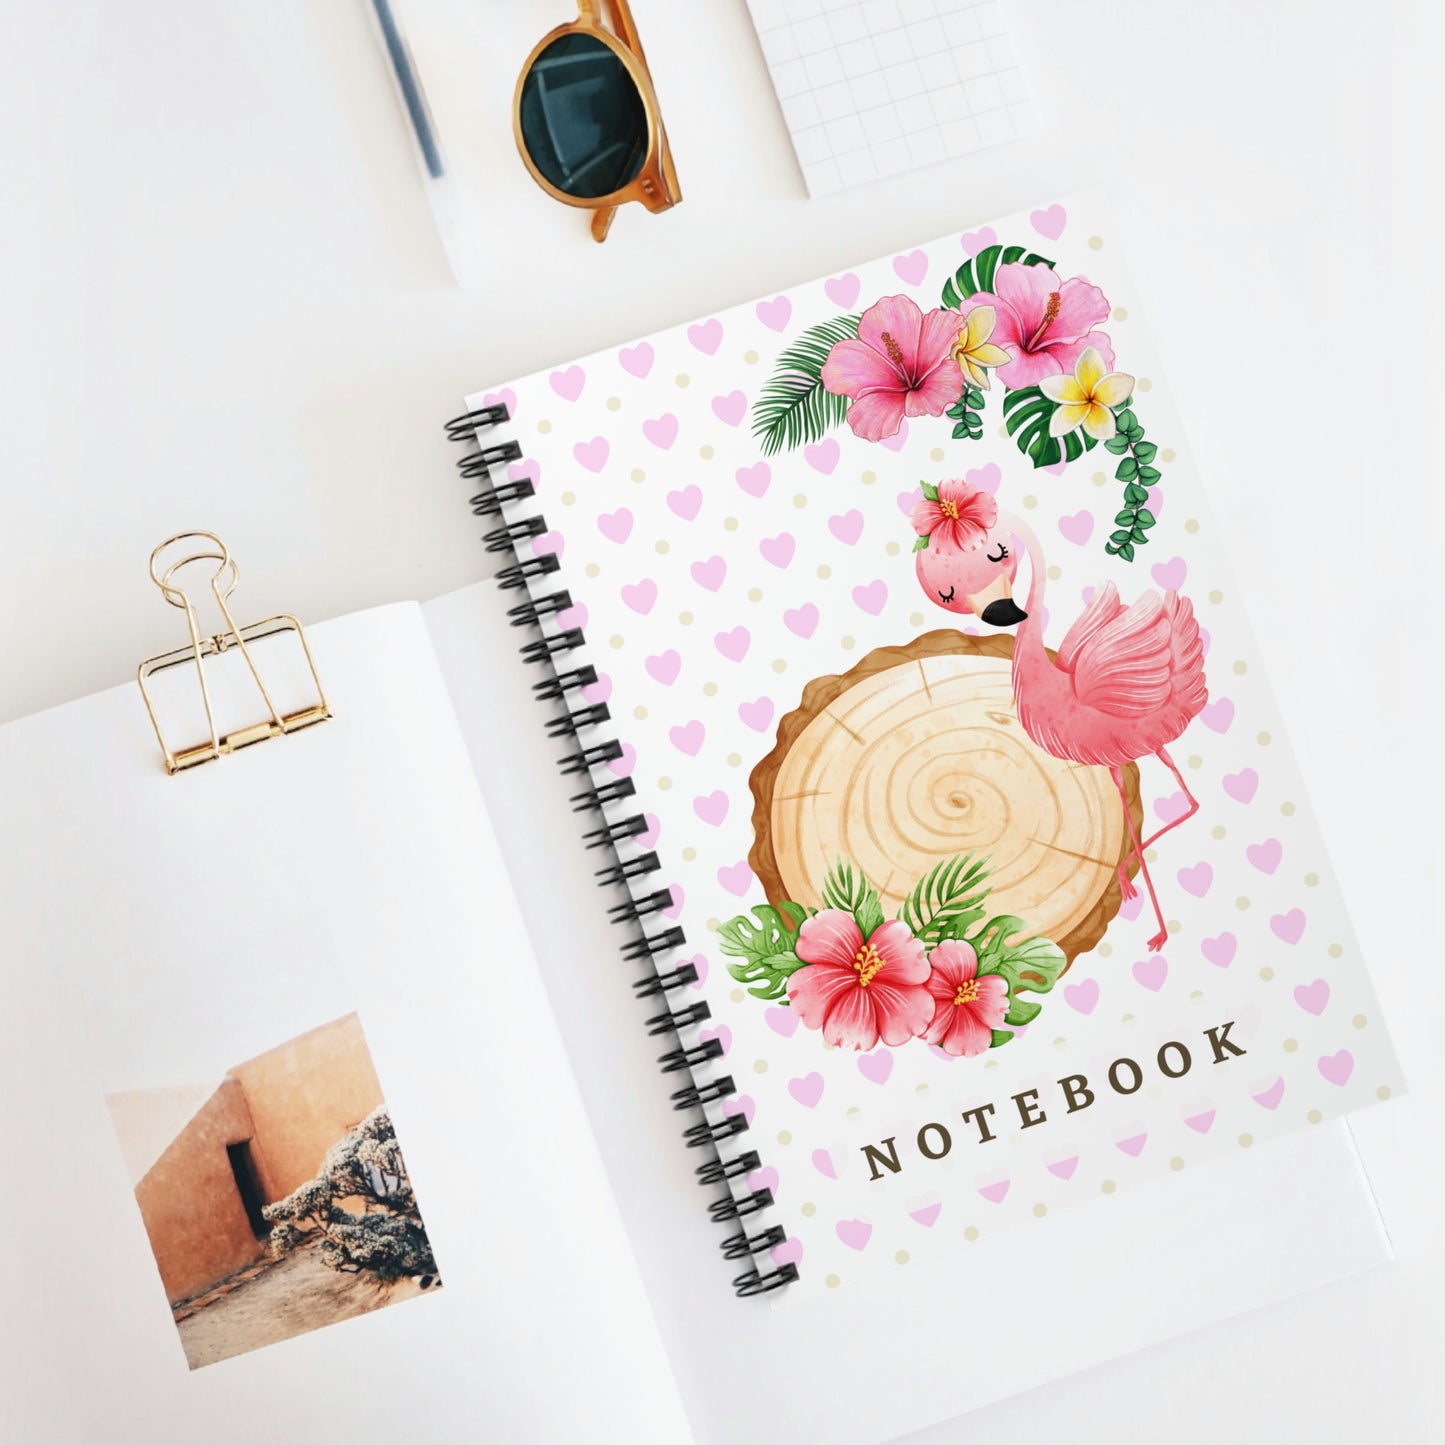 Flamingo with Hibiscus design Spiral Notebook - Ruled Line 118 pages